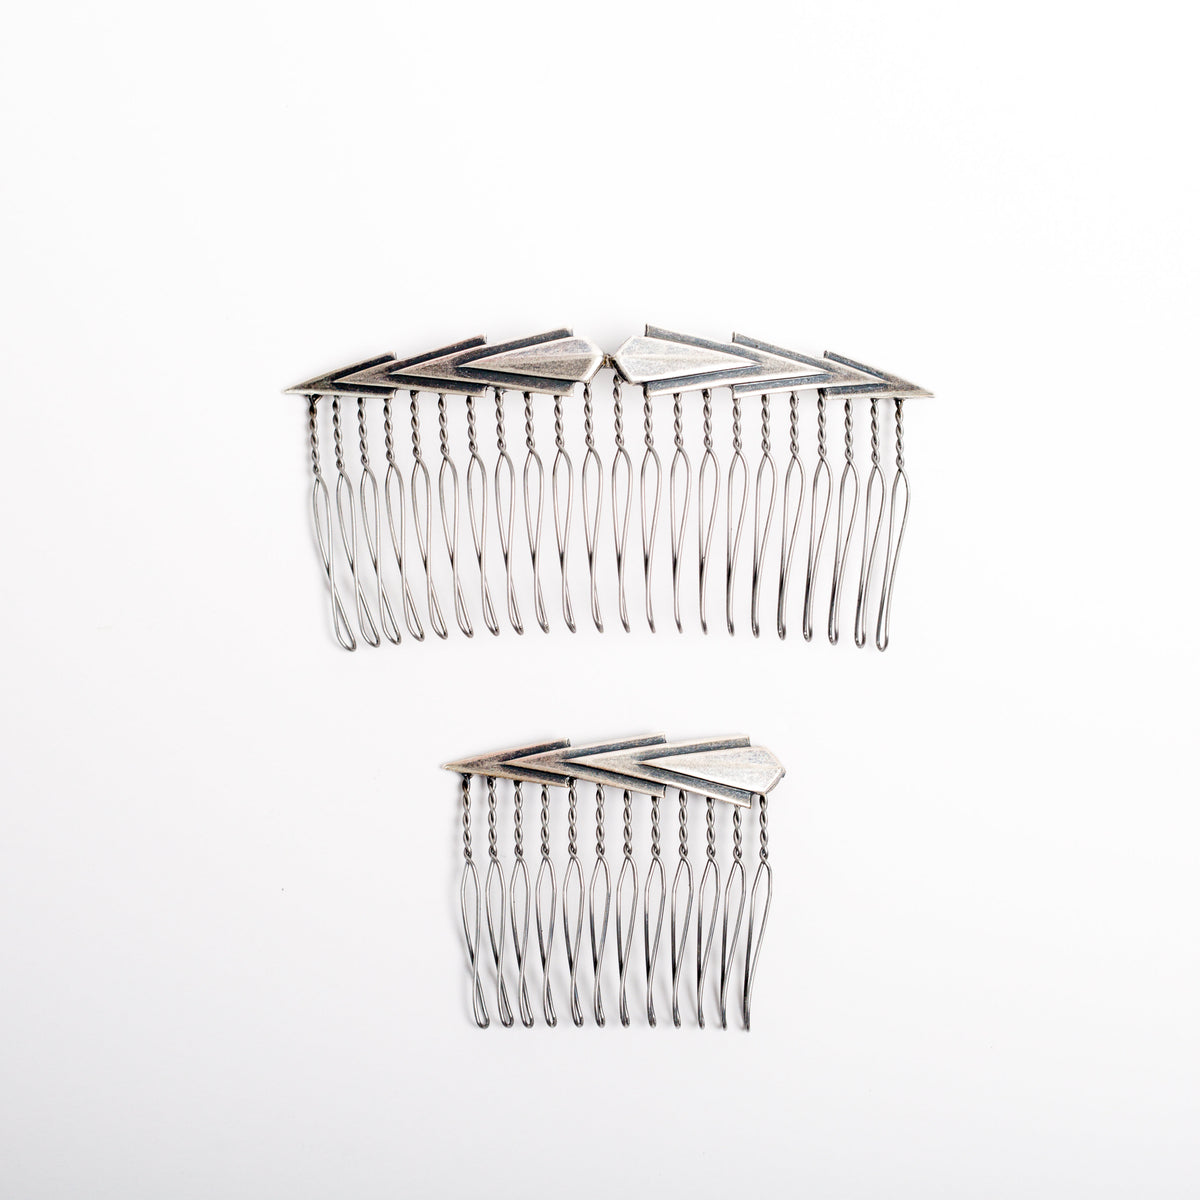 “To The Point’ Hair Combs